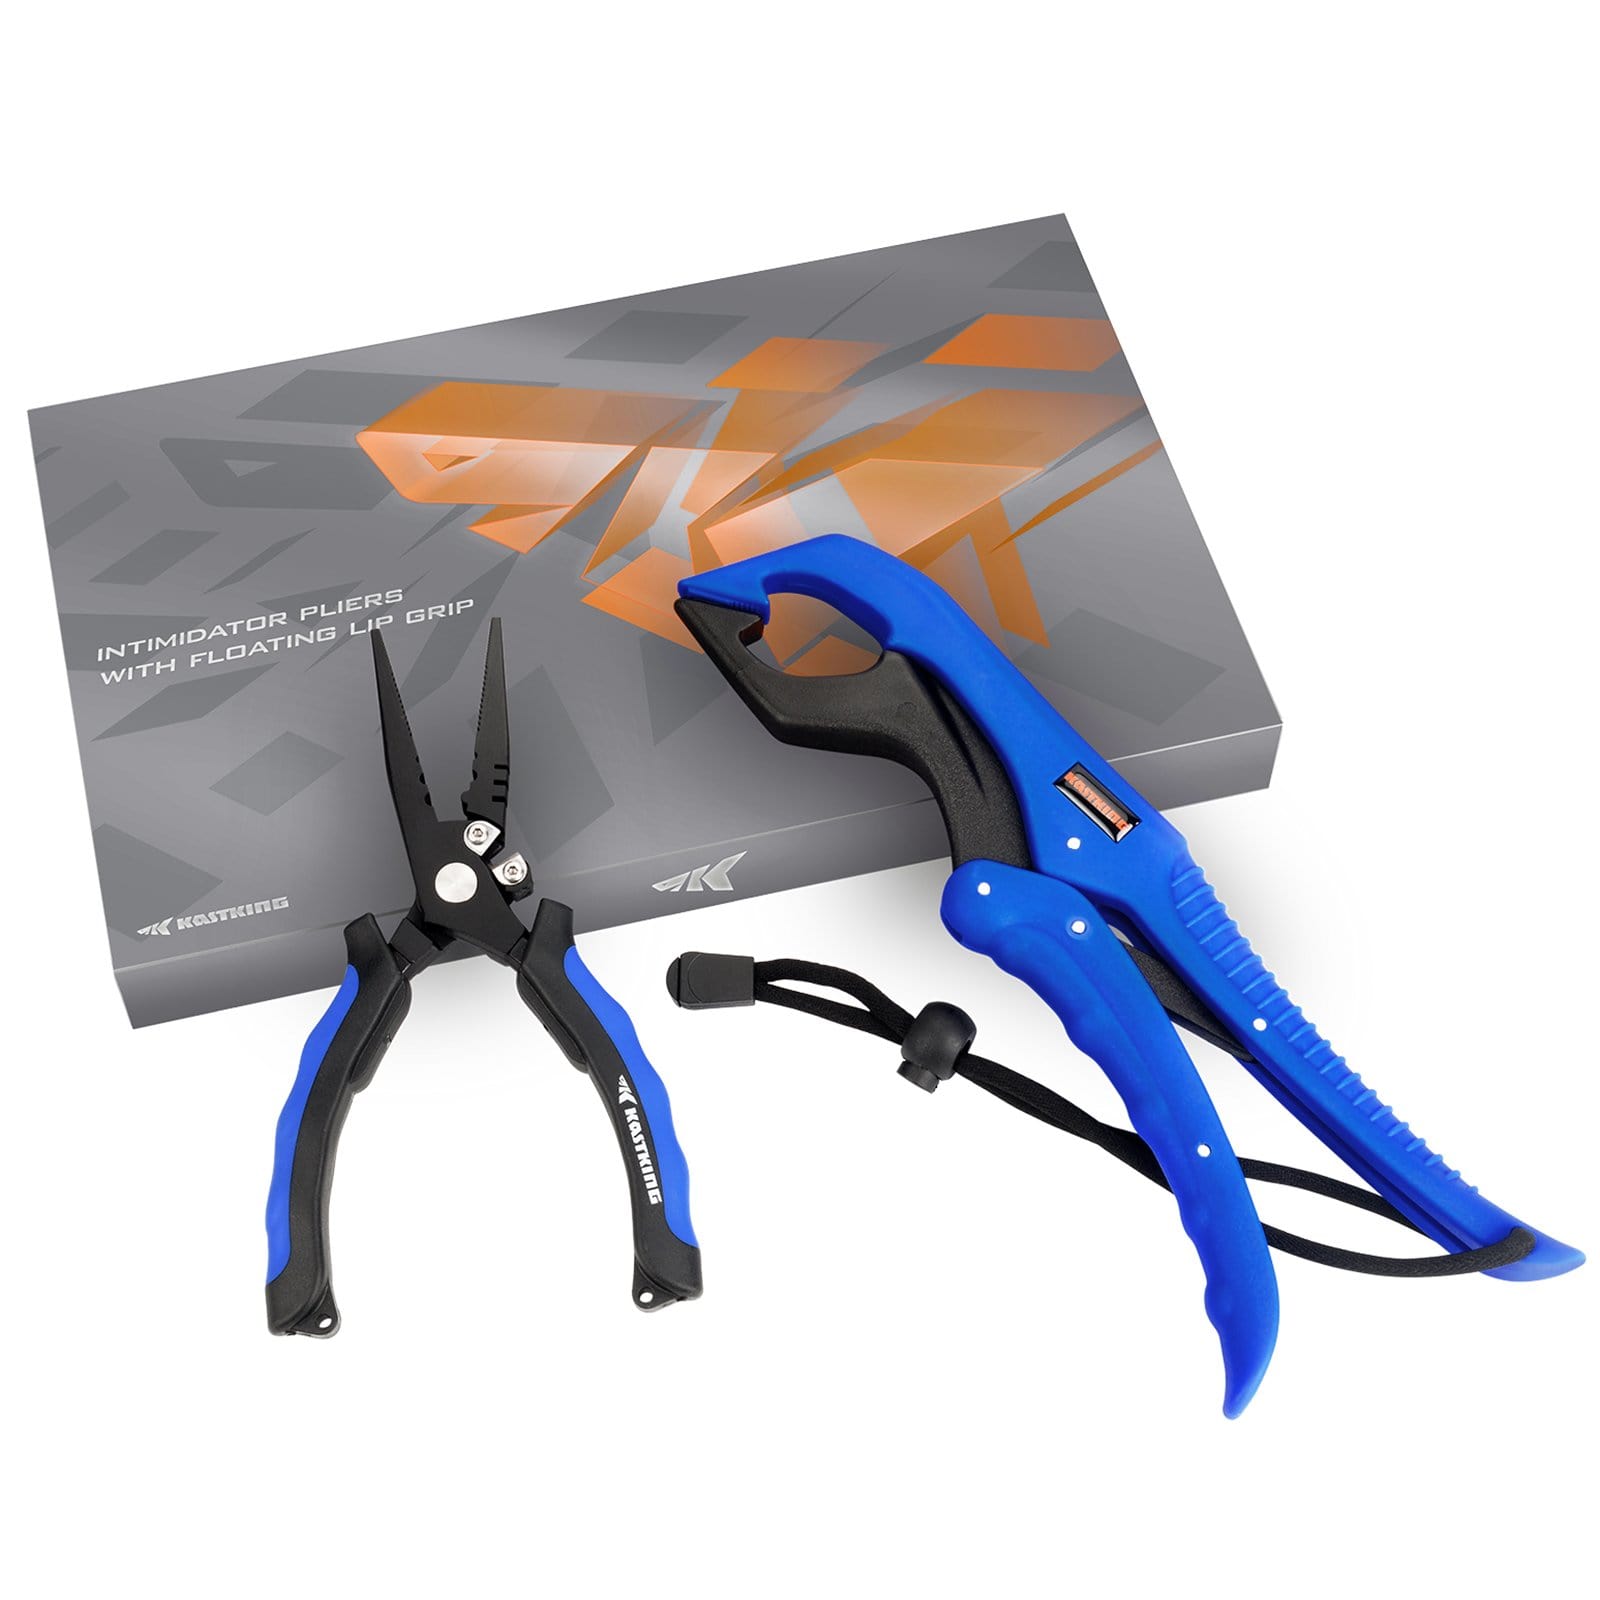 KastKing Fishing Pliers, Fish Lip Gripper or Fish Scale Combo